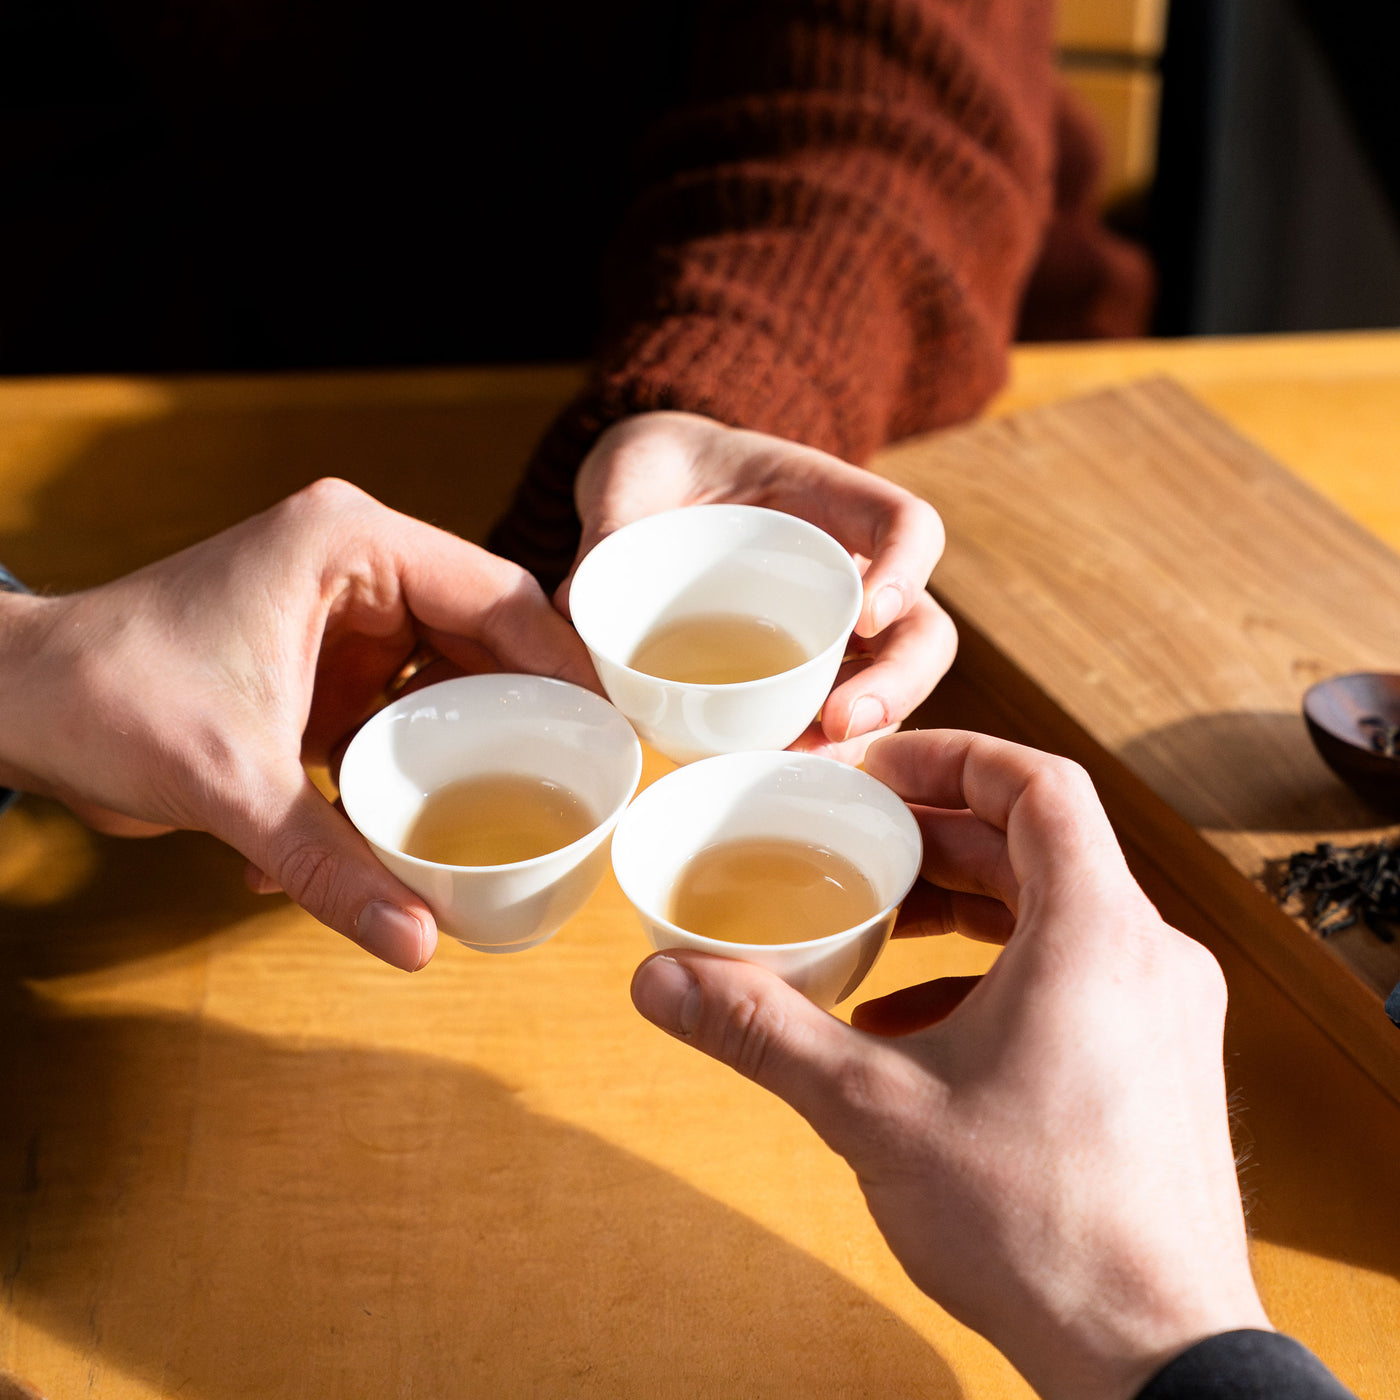 Three hands each holding a small gaiwan cup filled with tea touching to signal a cheers.